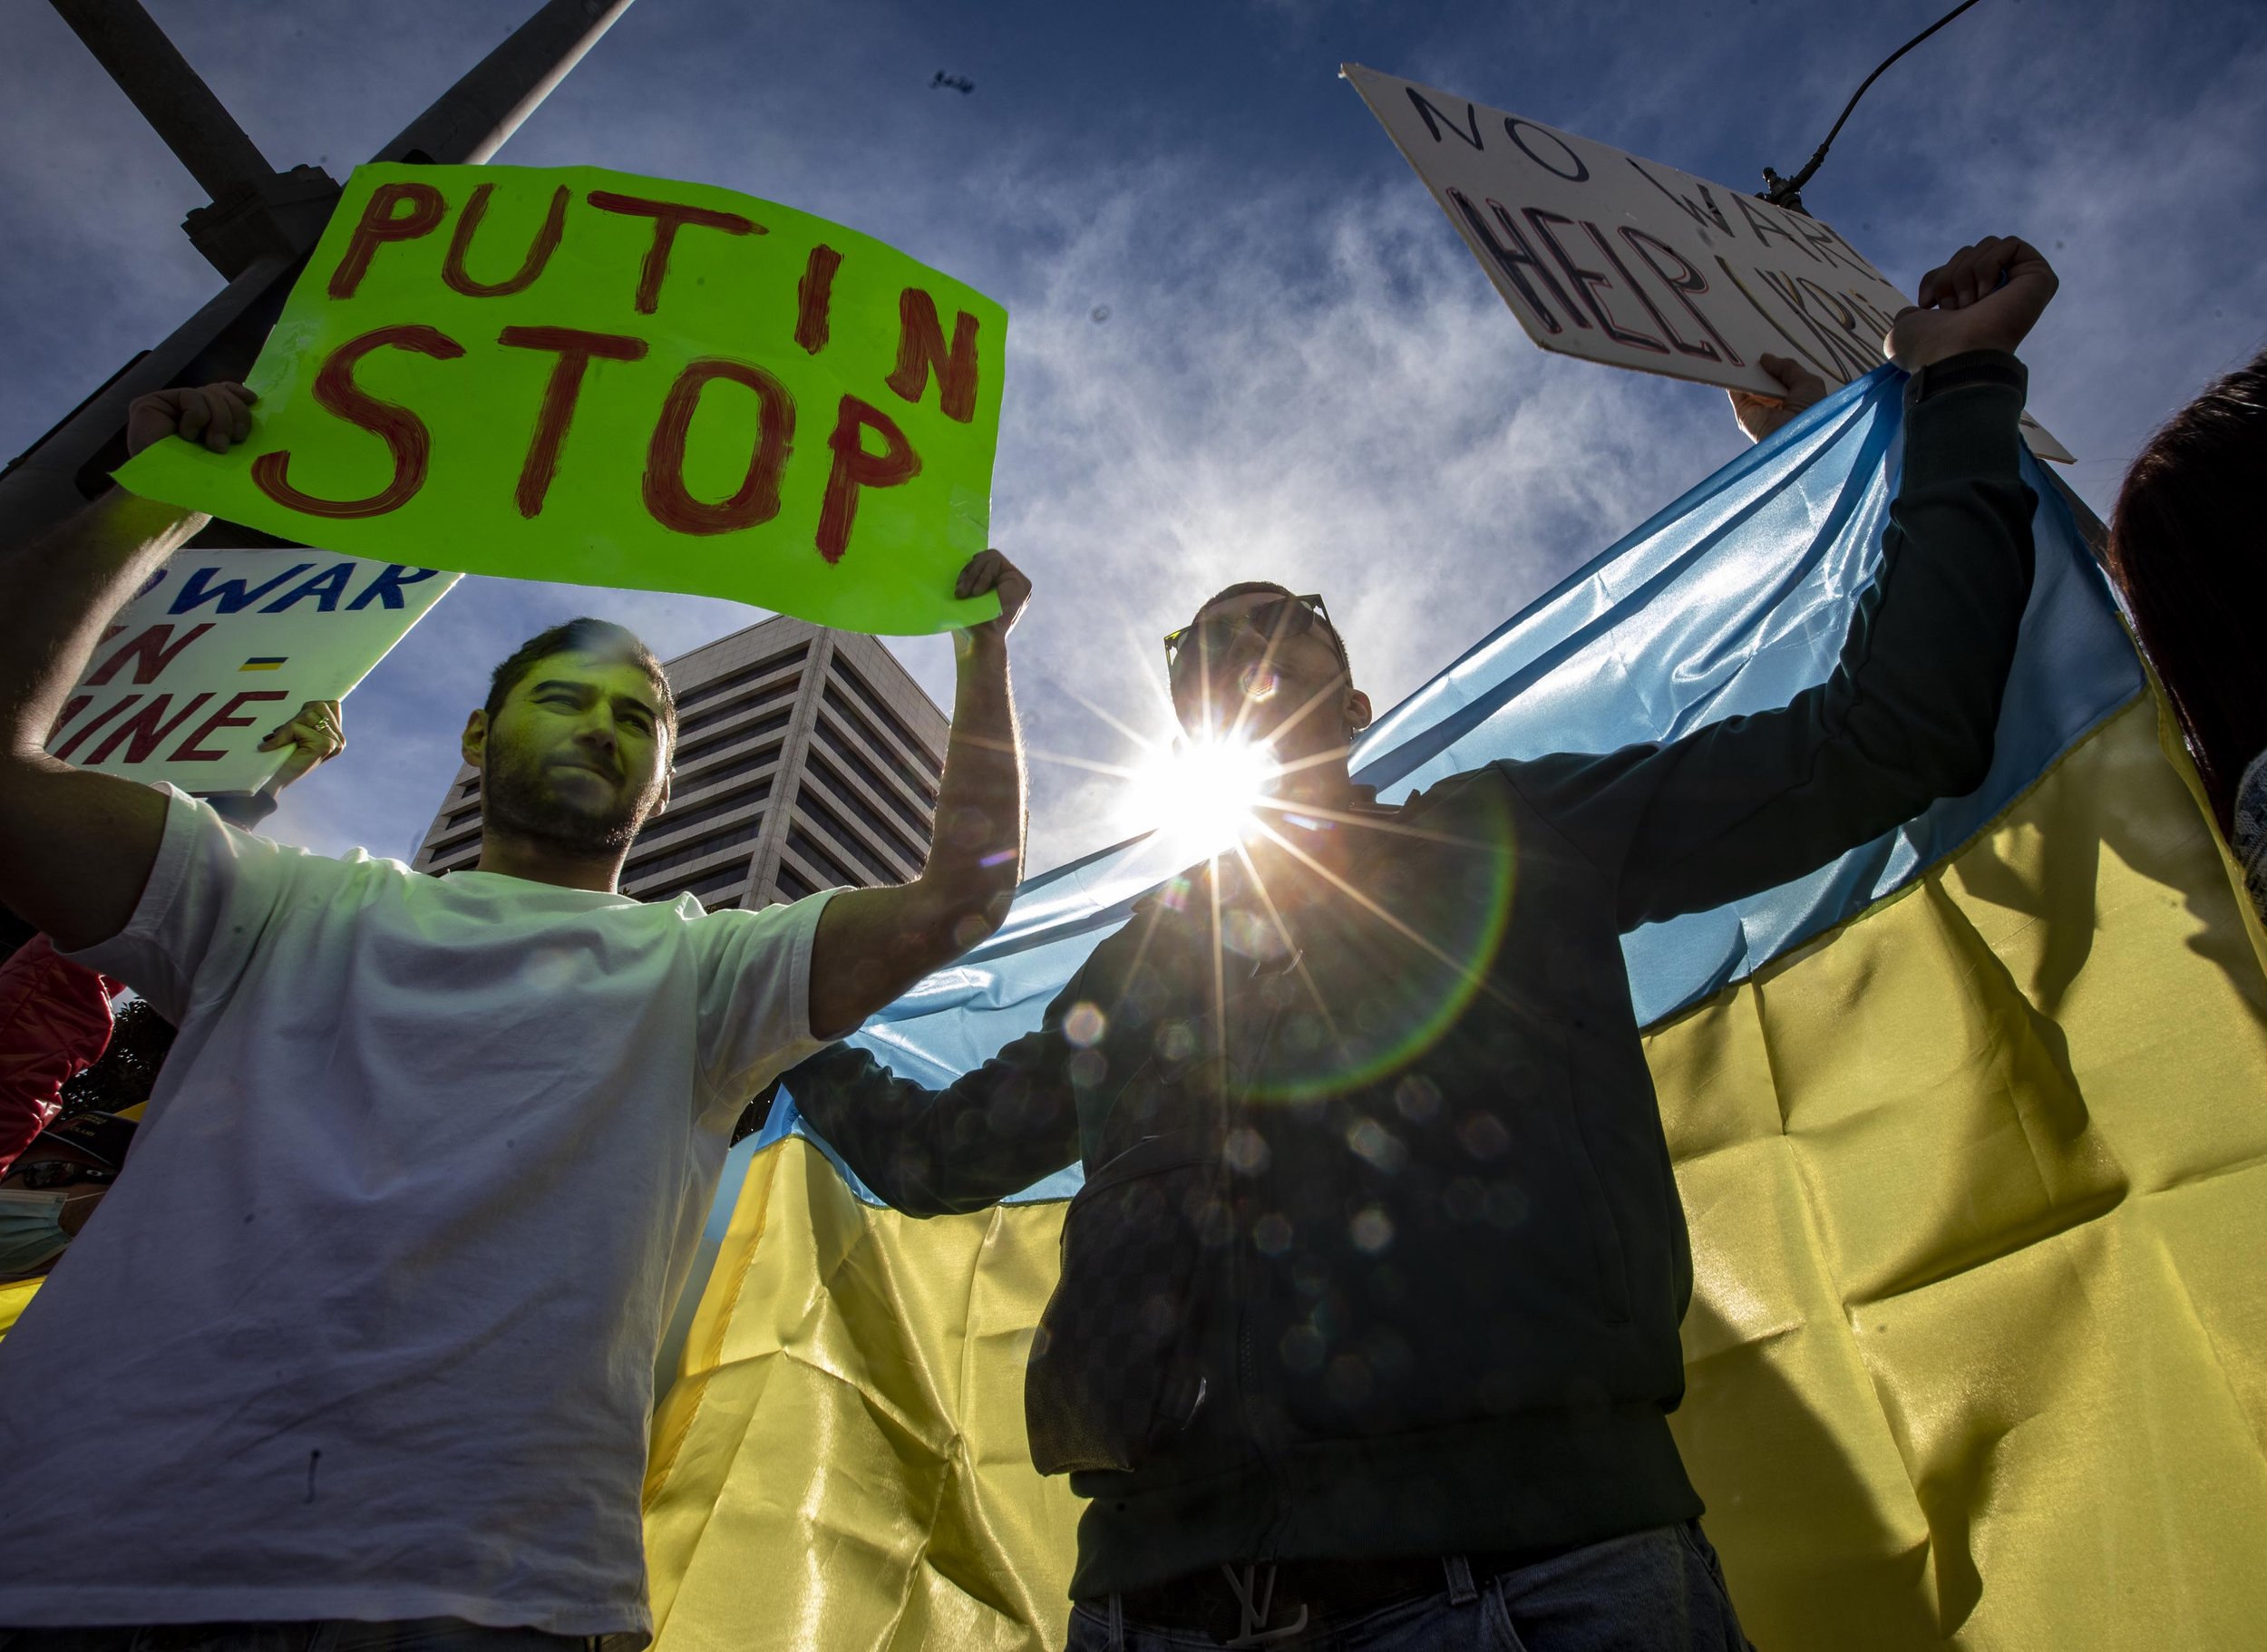  (L to R) Samvel Torosyan and David Megrabian were among the hundreds of people supporting the Ukraine who gathered at the intersection of Santa Monica and Sepulveda Boulevards in  Westwood to protest against Russia's invasion of Ukraine. 